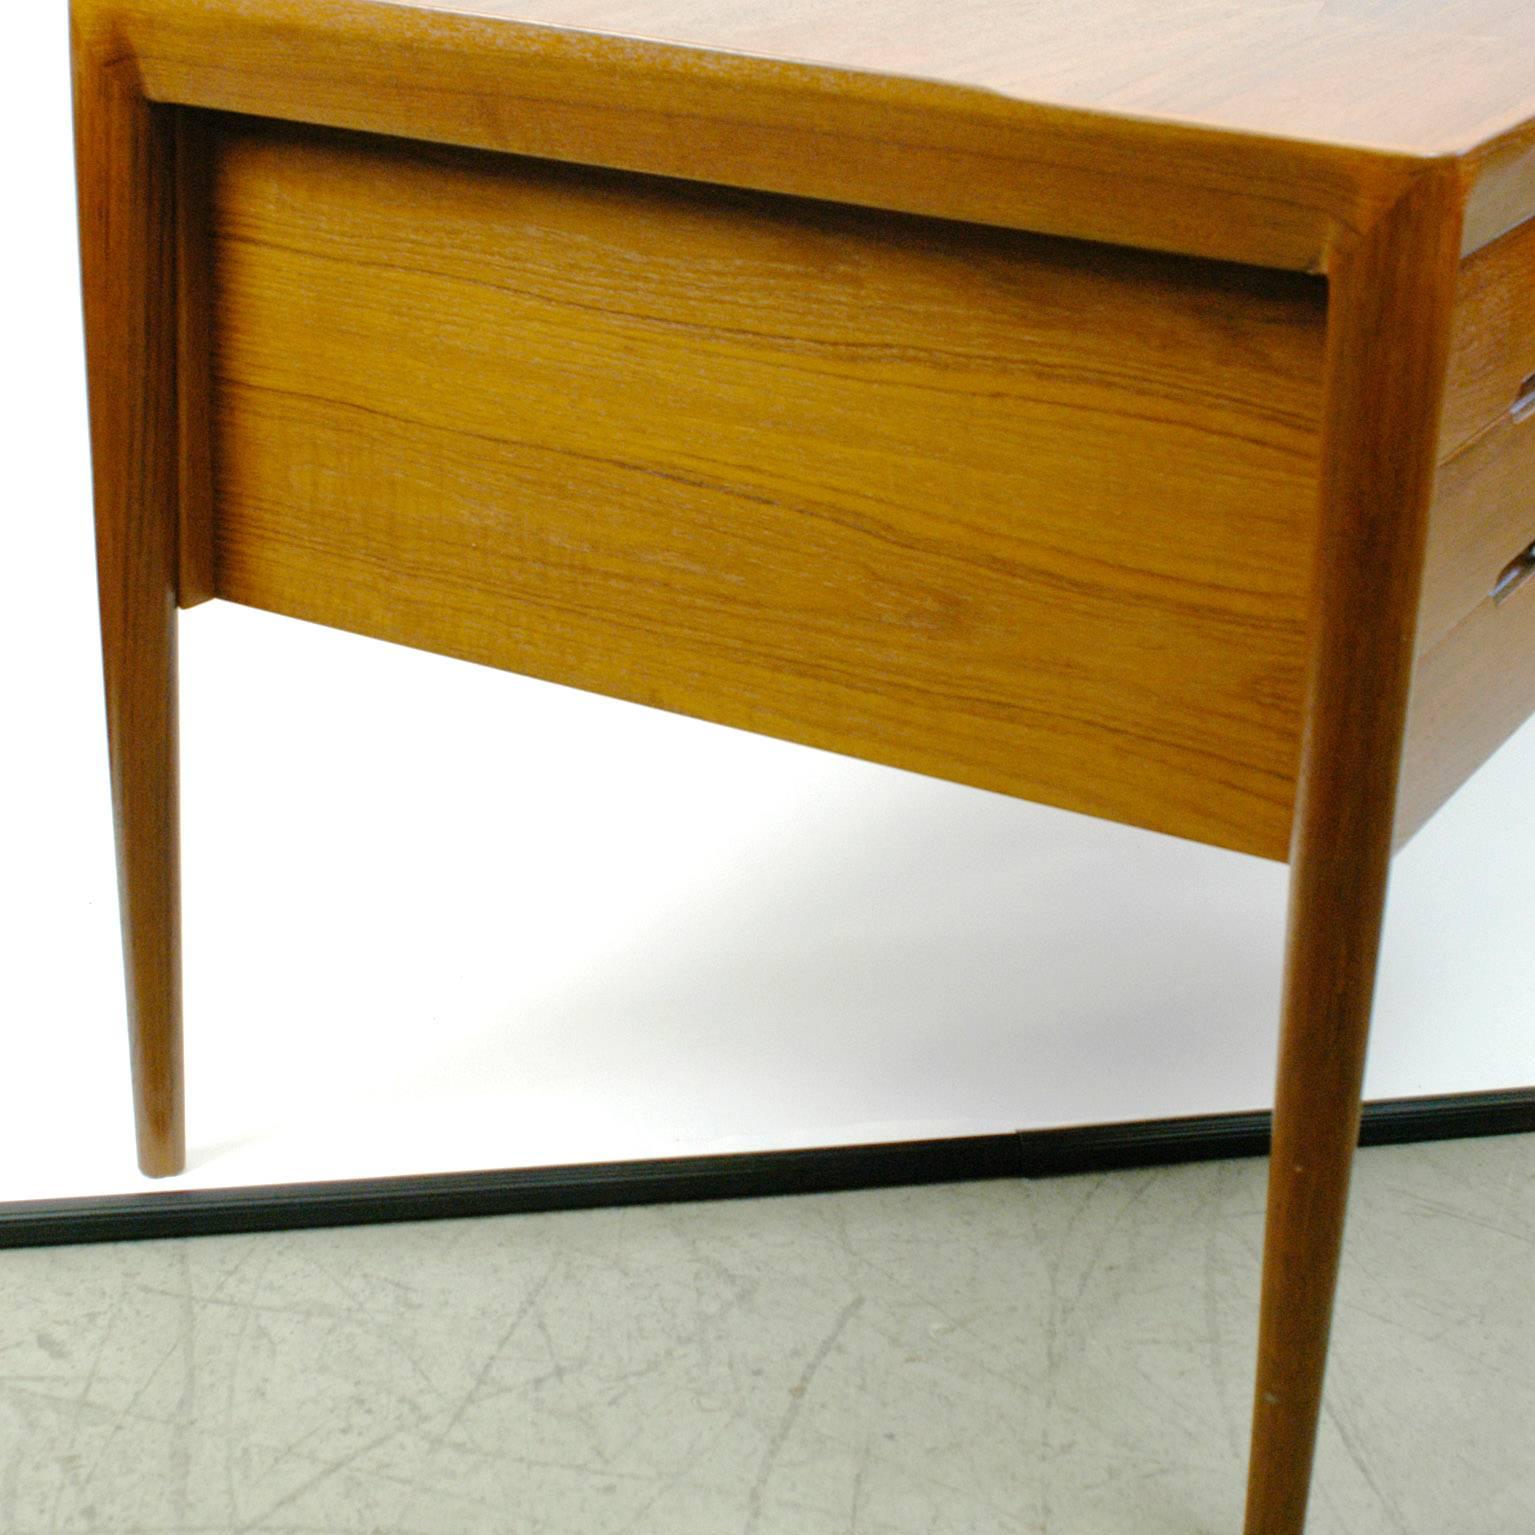 Excellent Danish 1960s teak desk with three drawers container.
Mod. no 66, original manufacturers label and Danish control label on the underside.